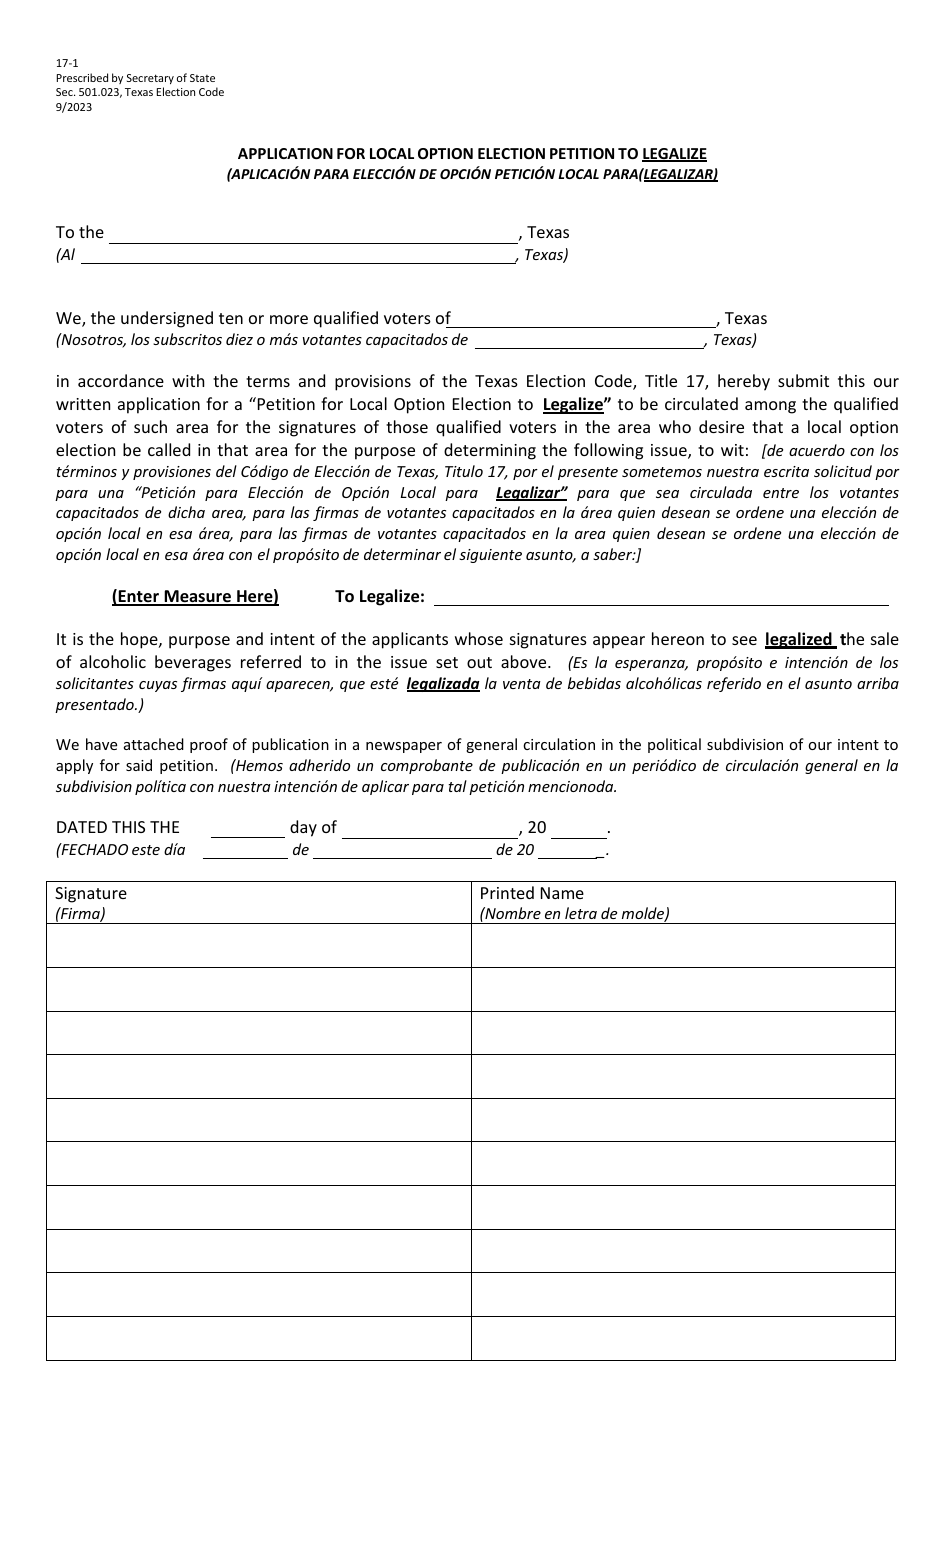 Form 17-1 Application for Local Option Election Petition to Legalize - Texas (English / Spanish), Page 1